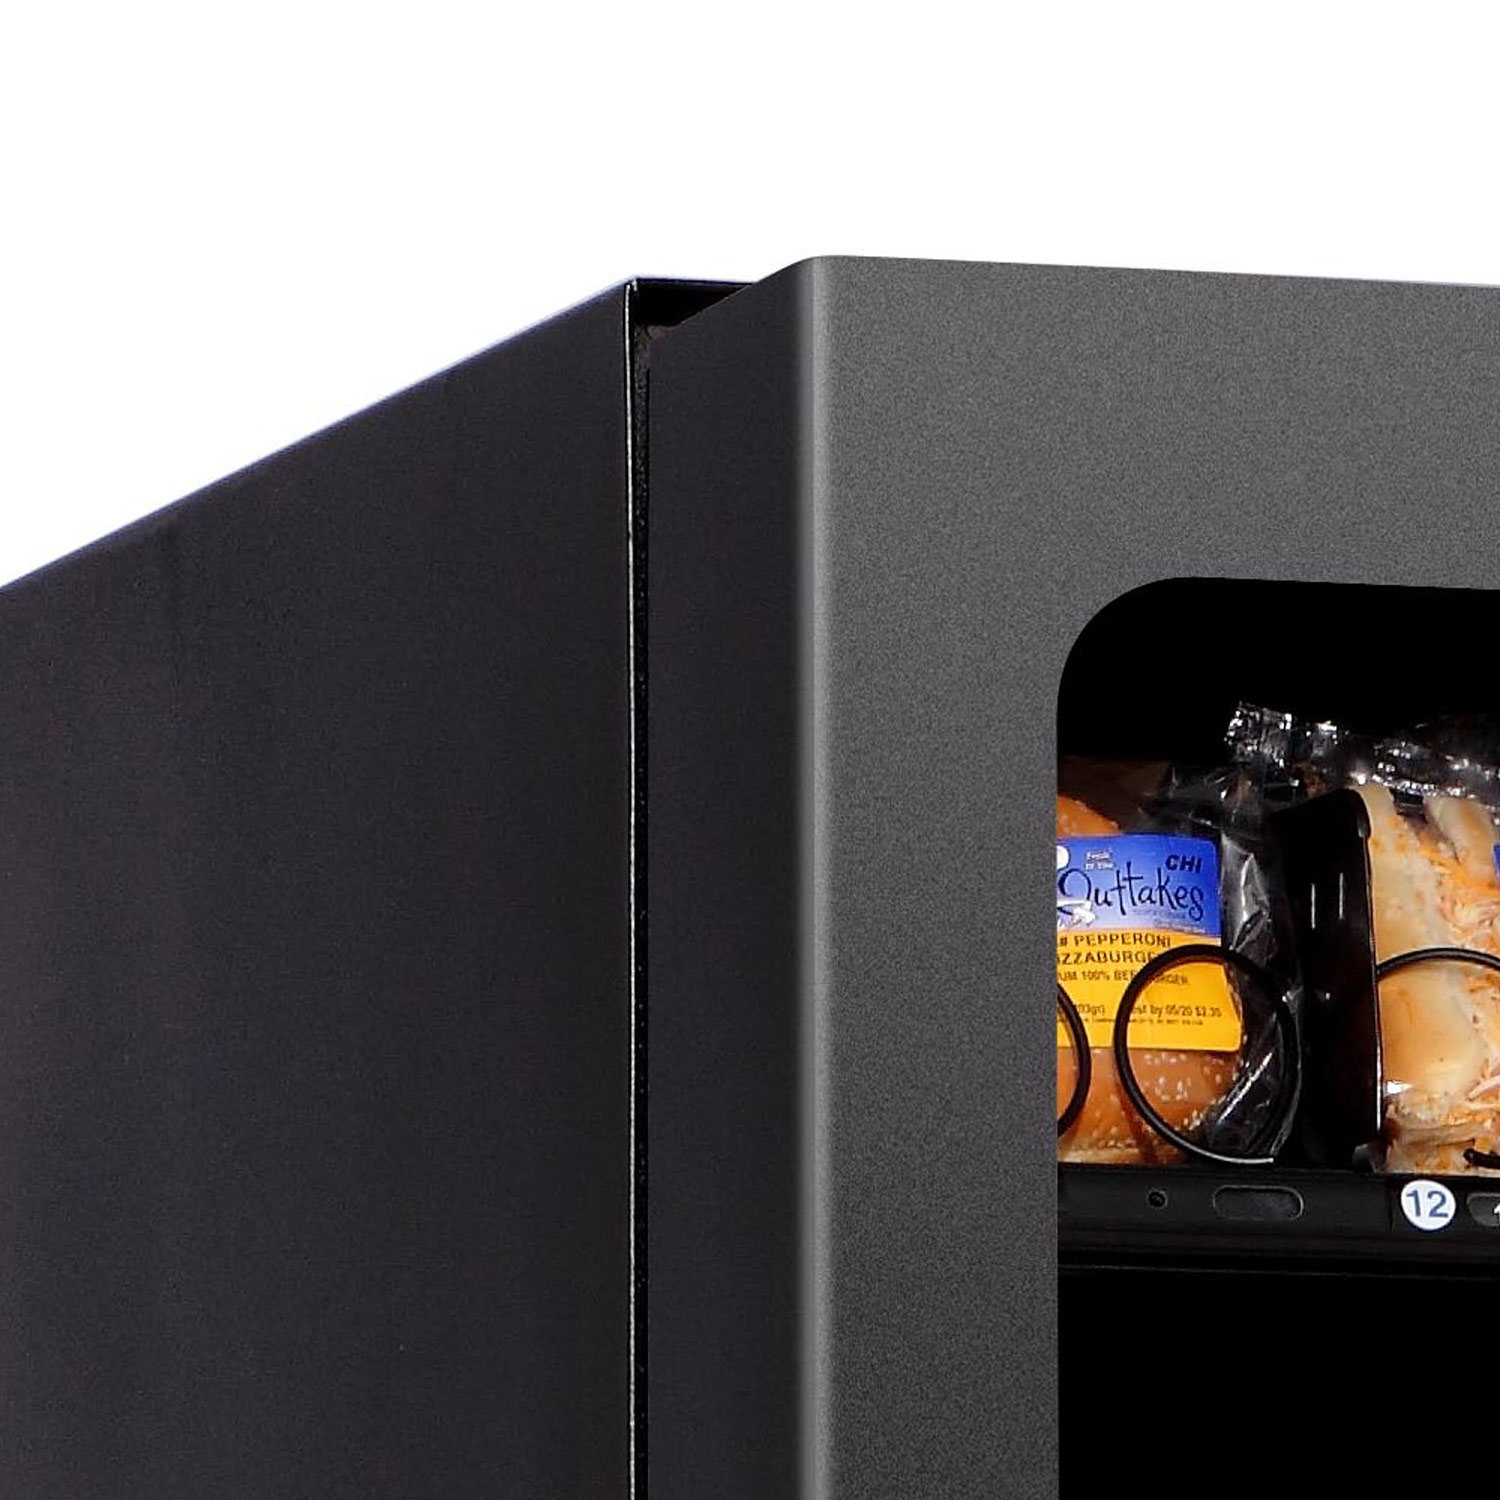 Frozen vending machine from Selectivend that features a secure door in cabinet design.